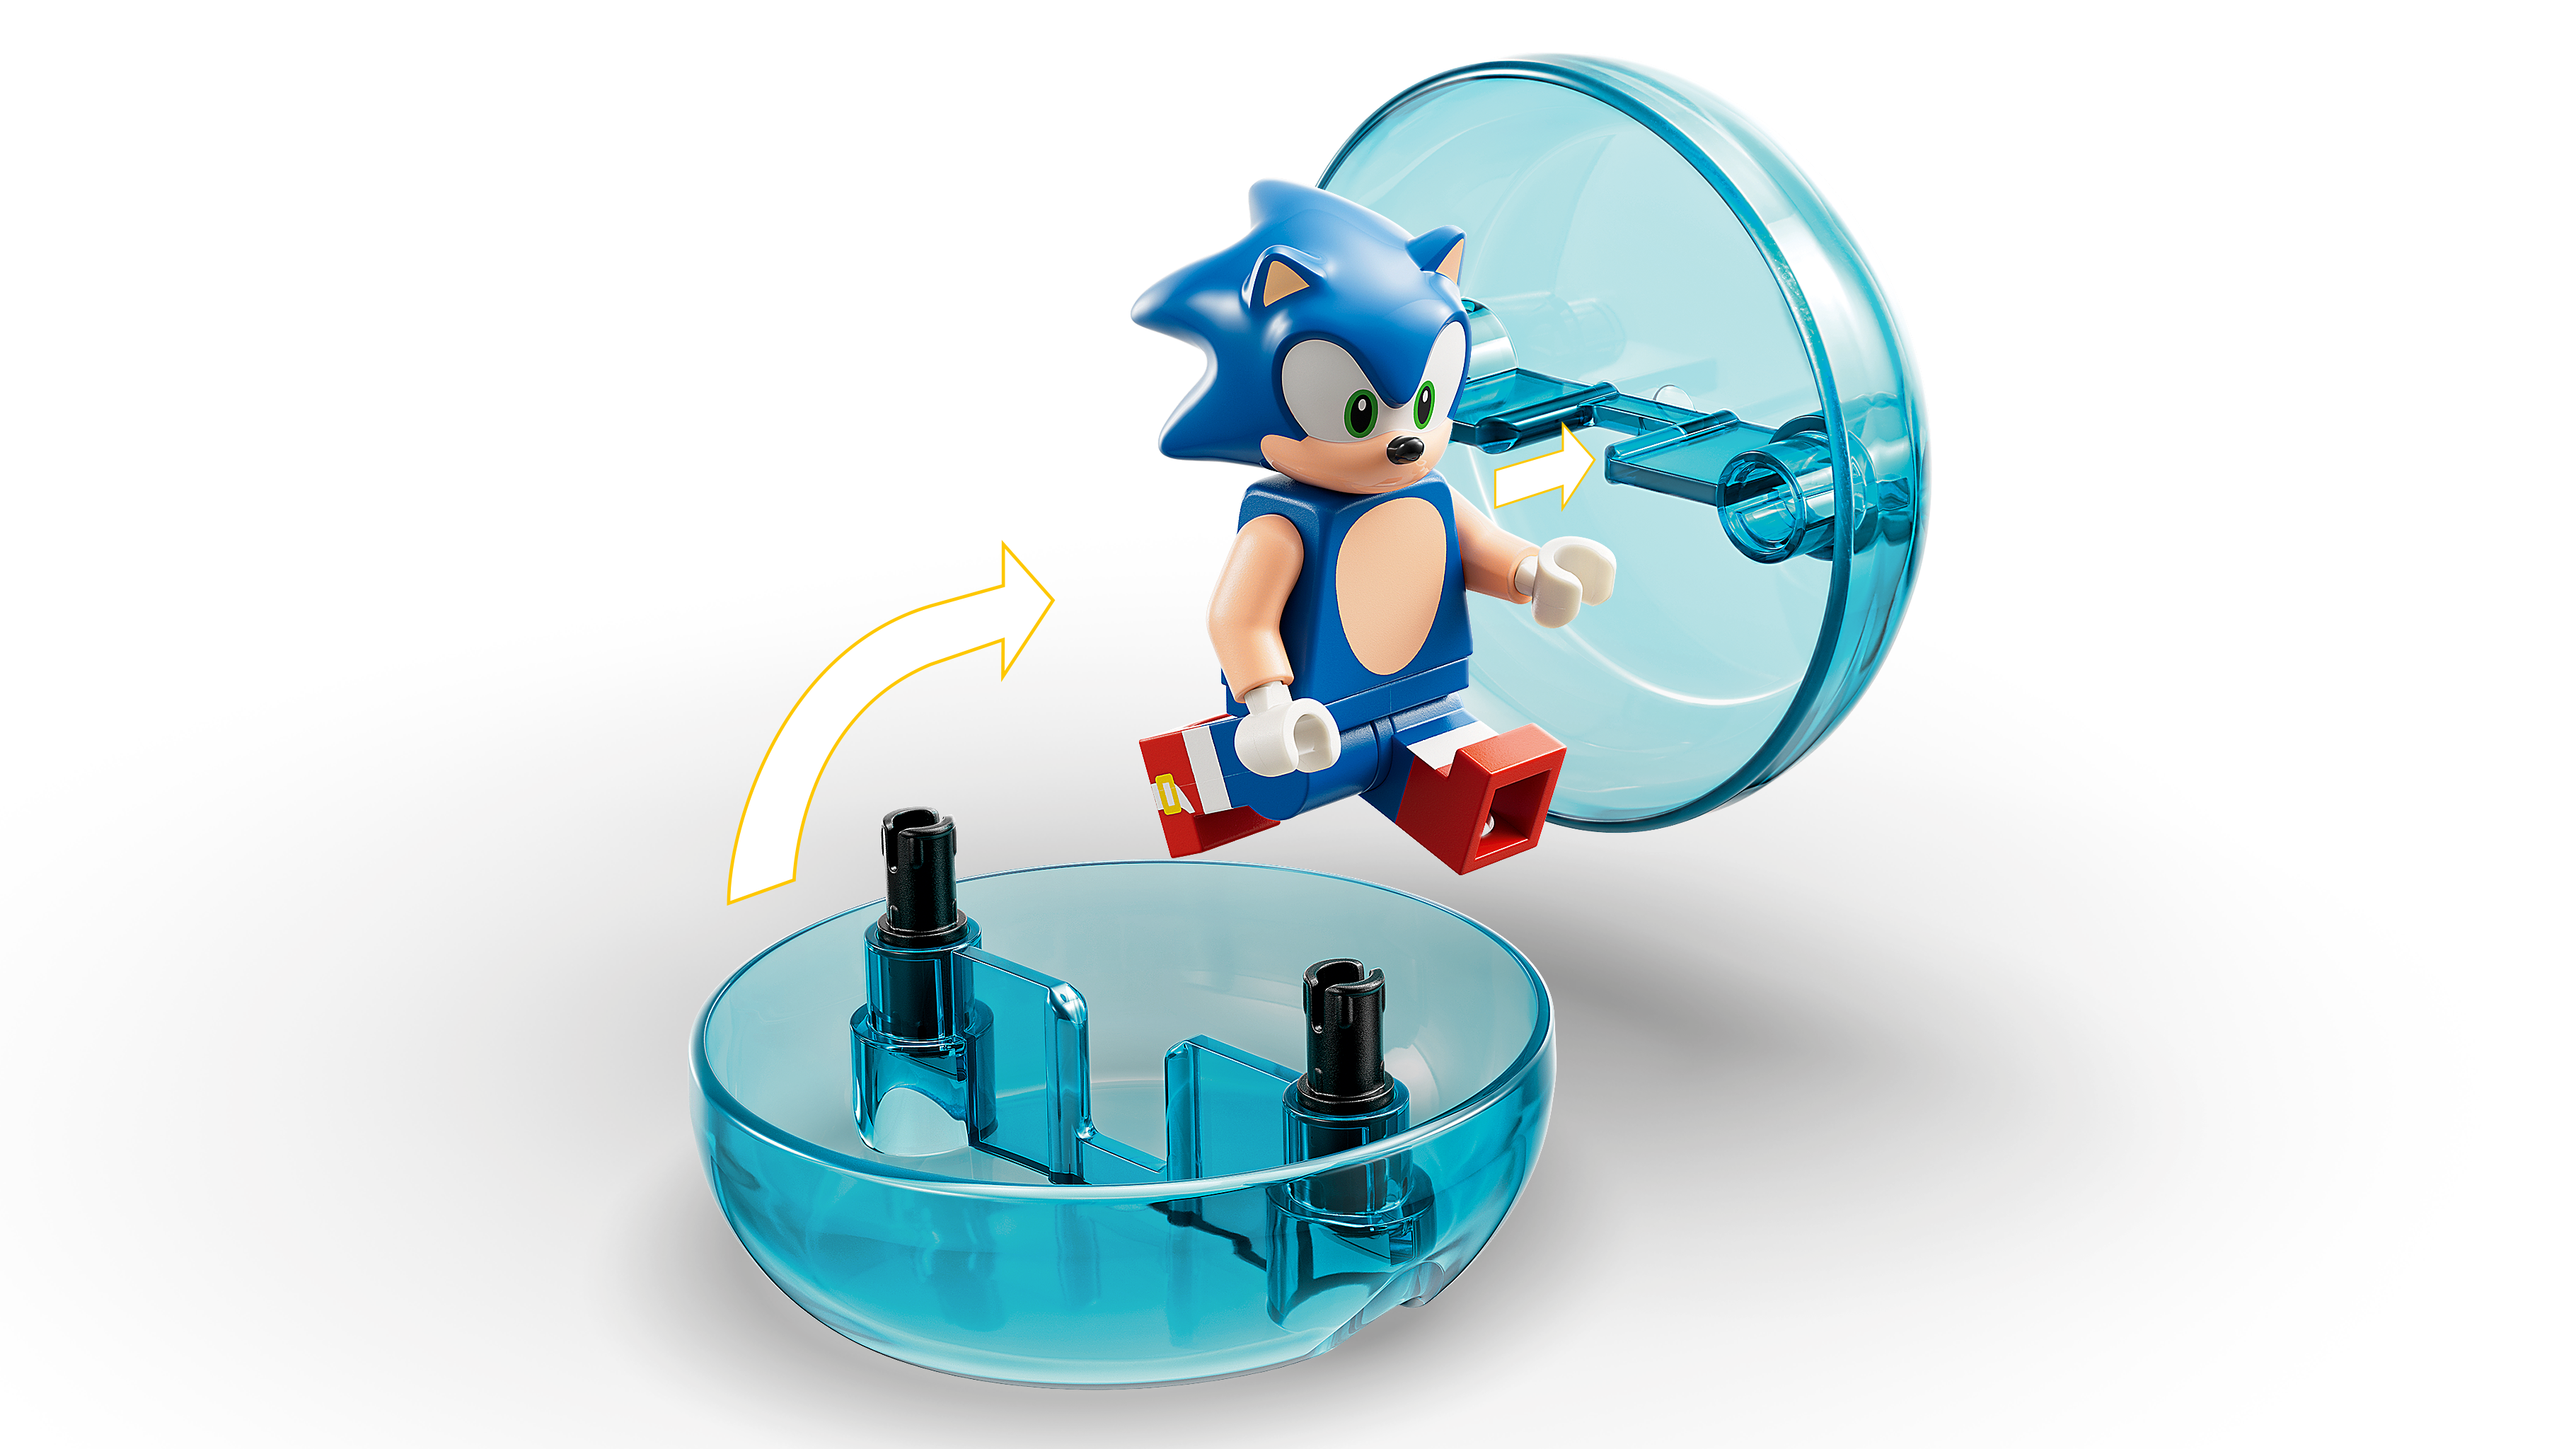 LEGO Sonic The Hedgehog Sonic vs. Dr. Eggman's Death Egg Robot Building Toy  for Sonic Fans and 8 Year Old Gamers, Includes Speed Sphere and Launcher